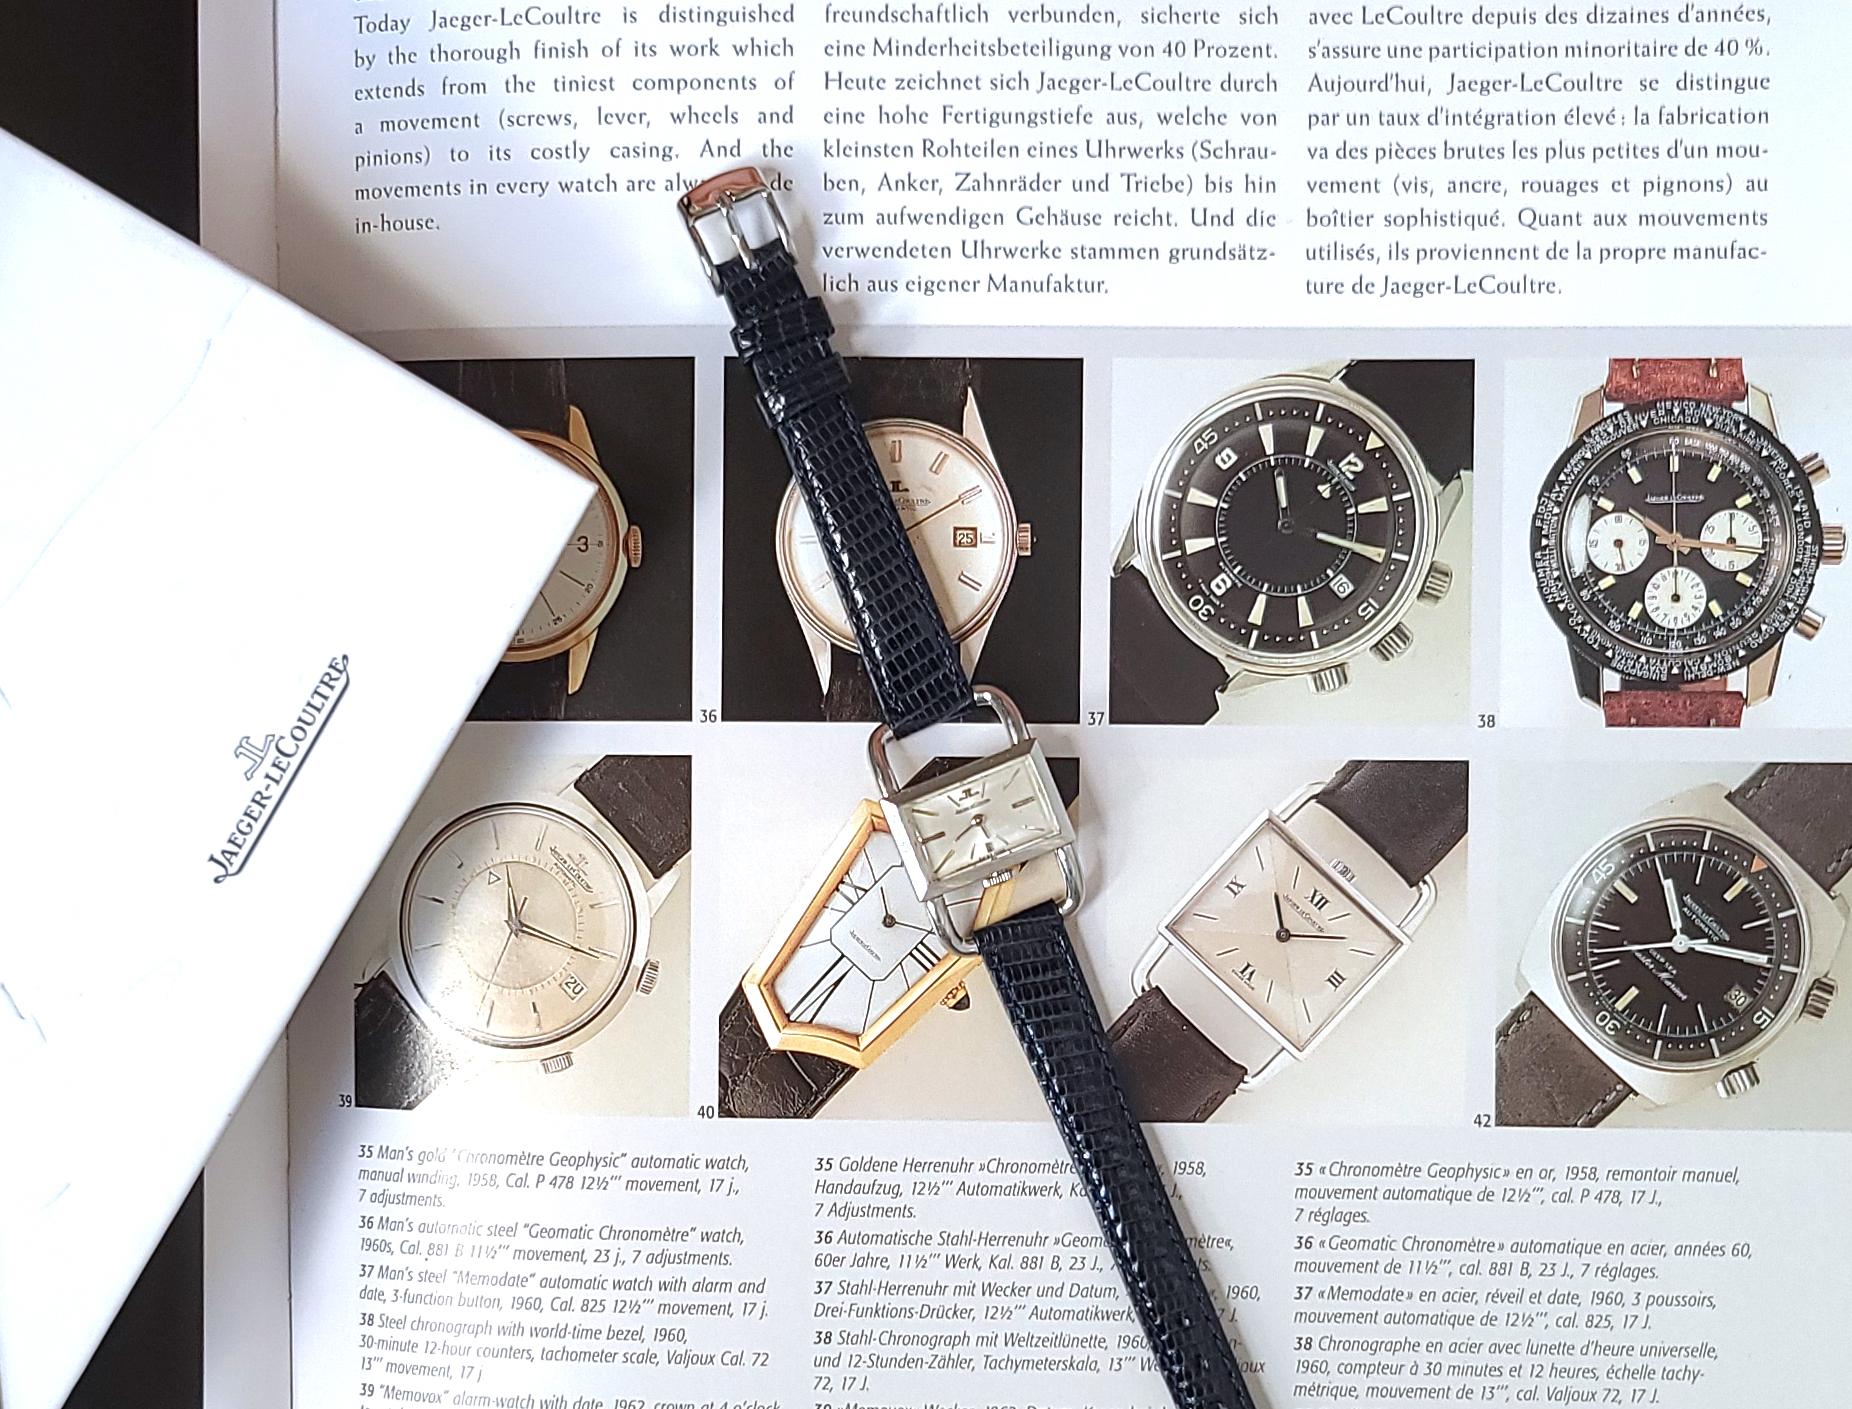 Jaeger-LeCoultre
Founded in 1833

In the heart of the Vallée de Joux, in the Swiss Jura Mountains, the Manufacturer Jaeger-LeCoultre has continuously renewed its creativity and inventiveness since 1833. One hundred and eighty different expert skills